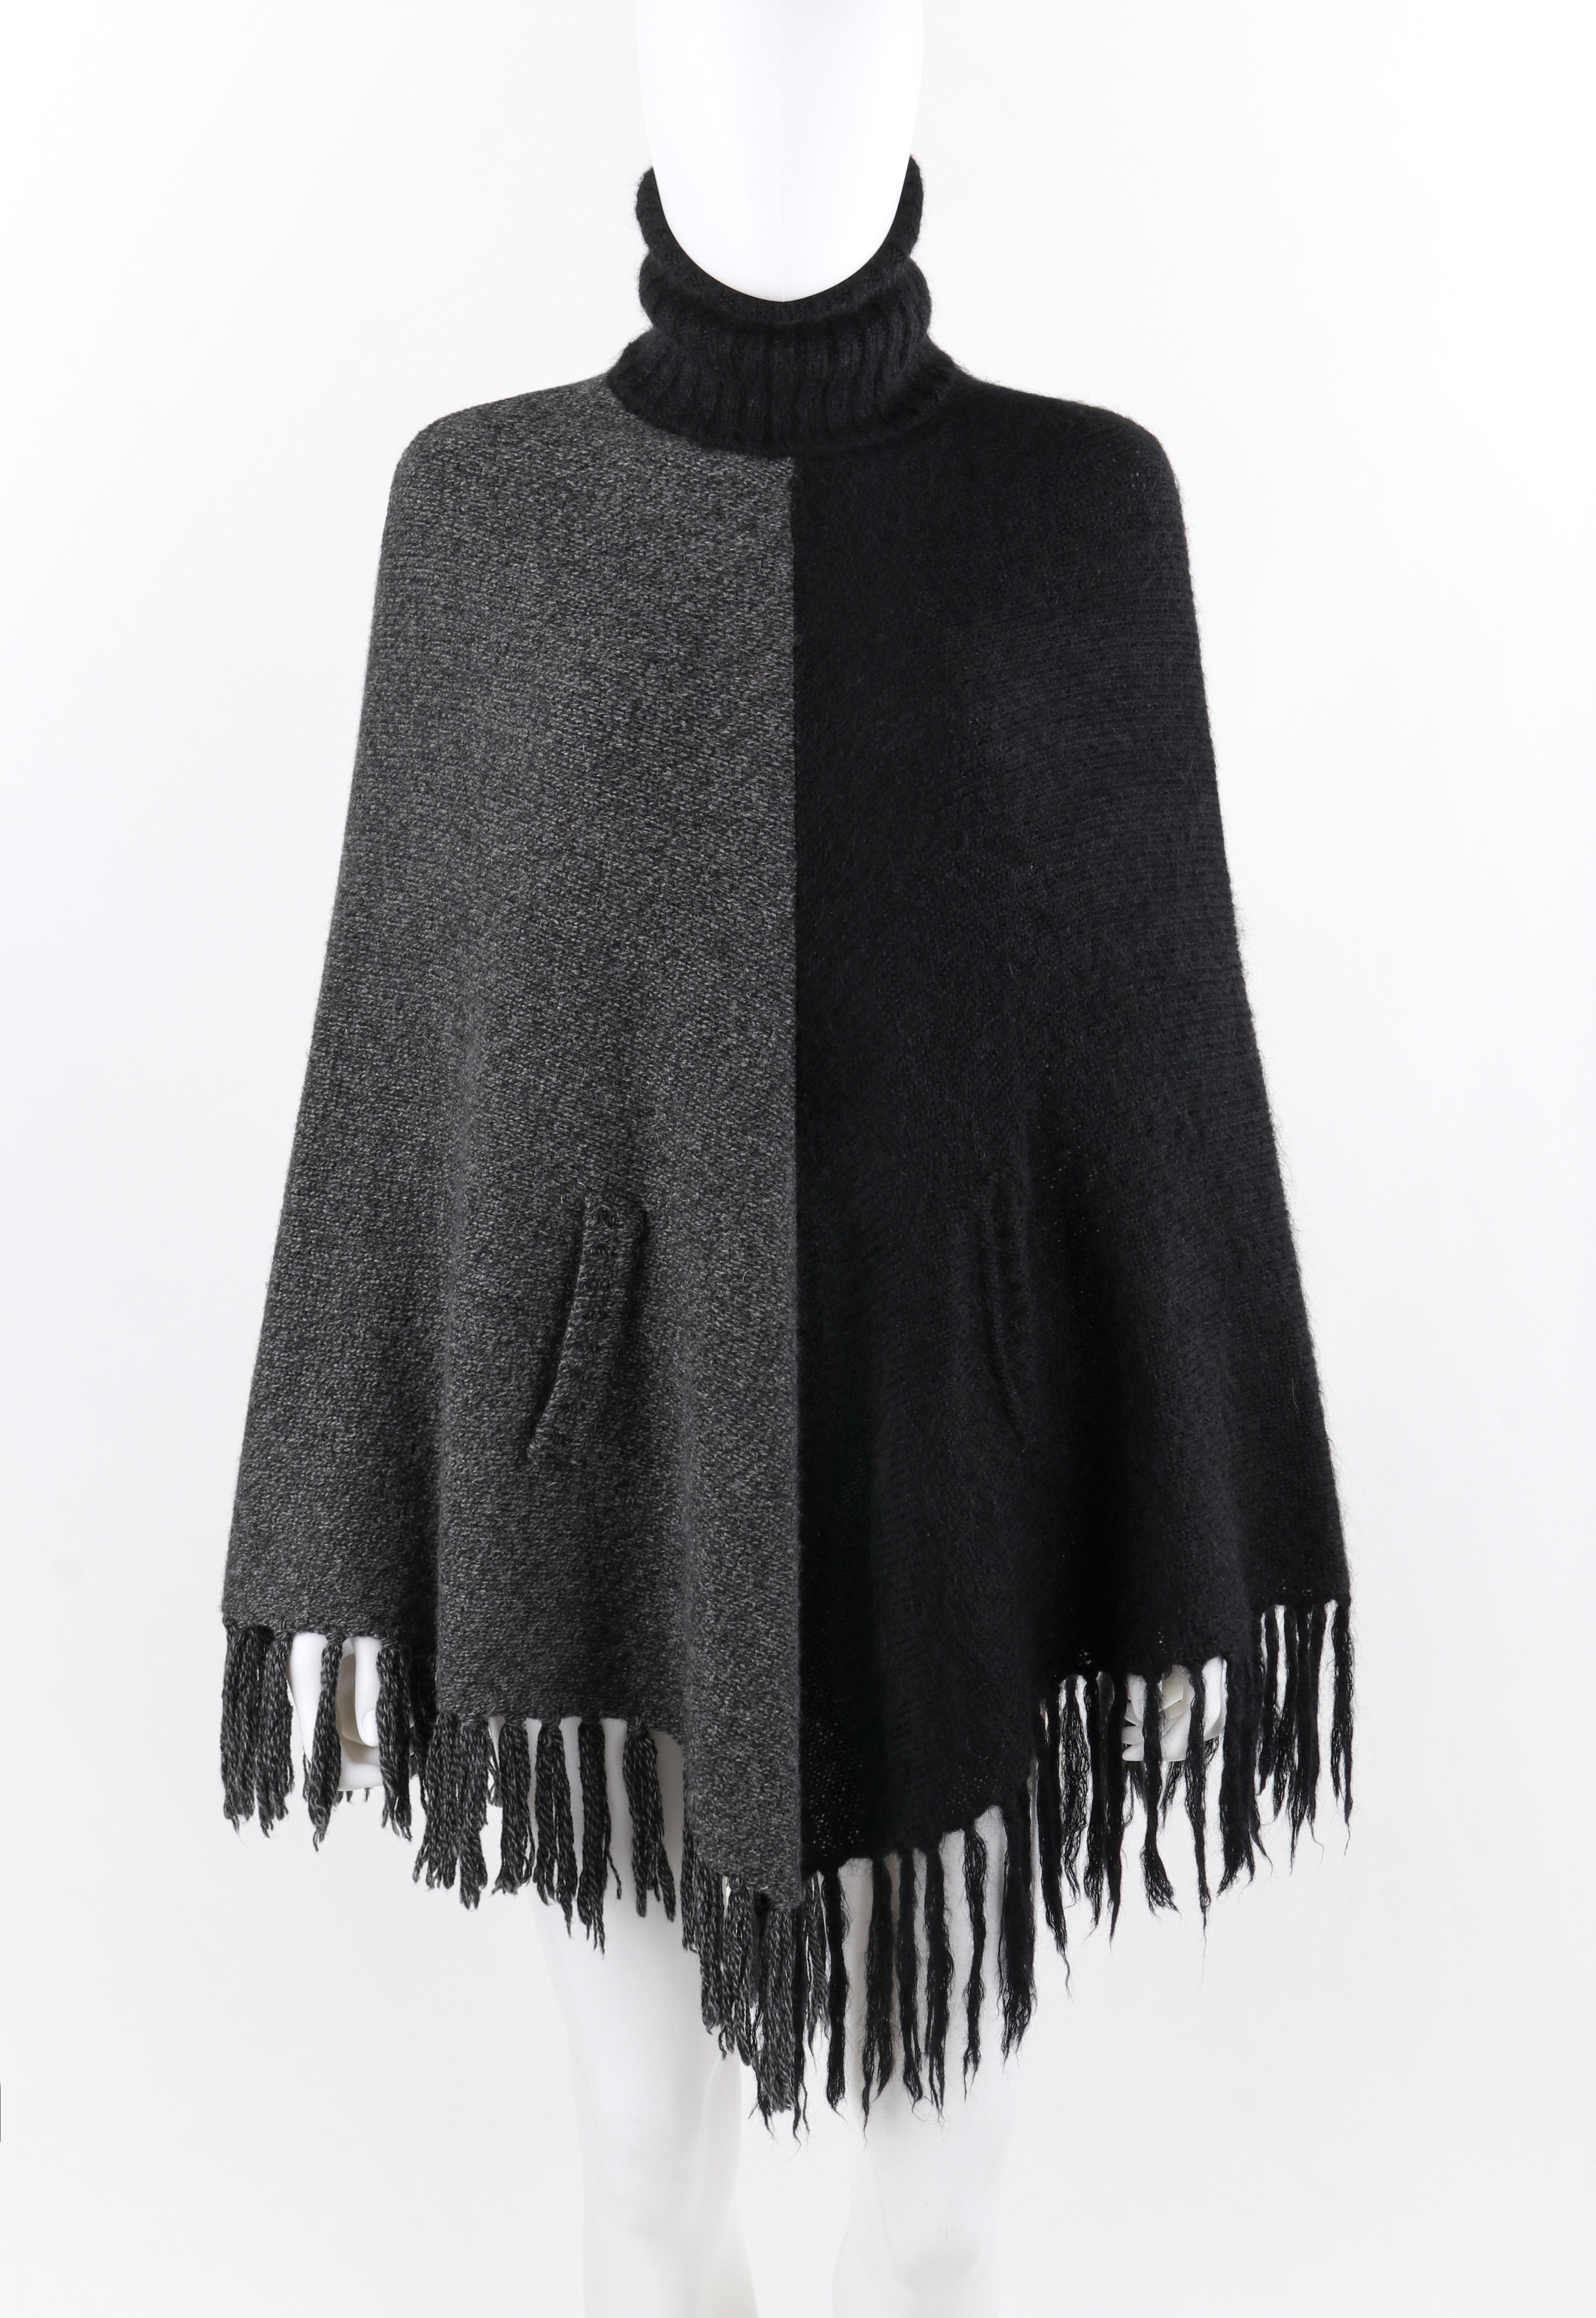 ALEXANDER McQUEEN A/W 1999 “The Overlook” Black Gray Knit Turtleneck Poncho Cape

Brand / Manufacturer: Alexander McQueen
Collection: A/W 1999 “The Overlook”
Designer: Alexander McQueen
Style: Turtleneck poncho cape
Color(s): Gray, black
Lined: